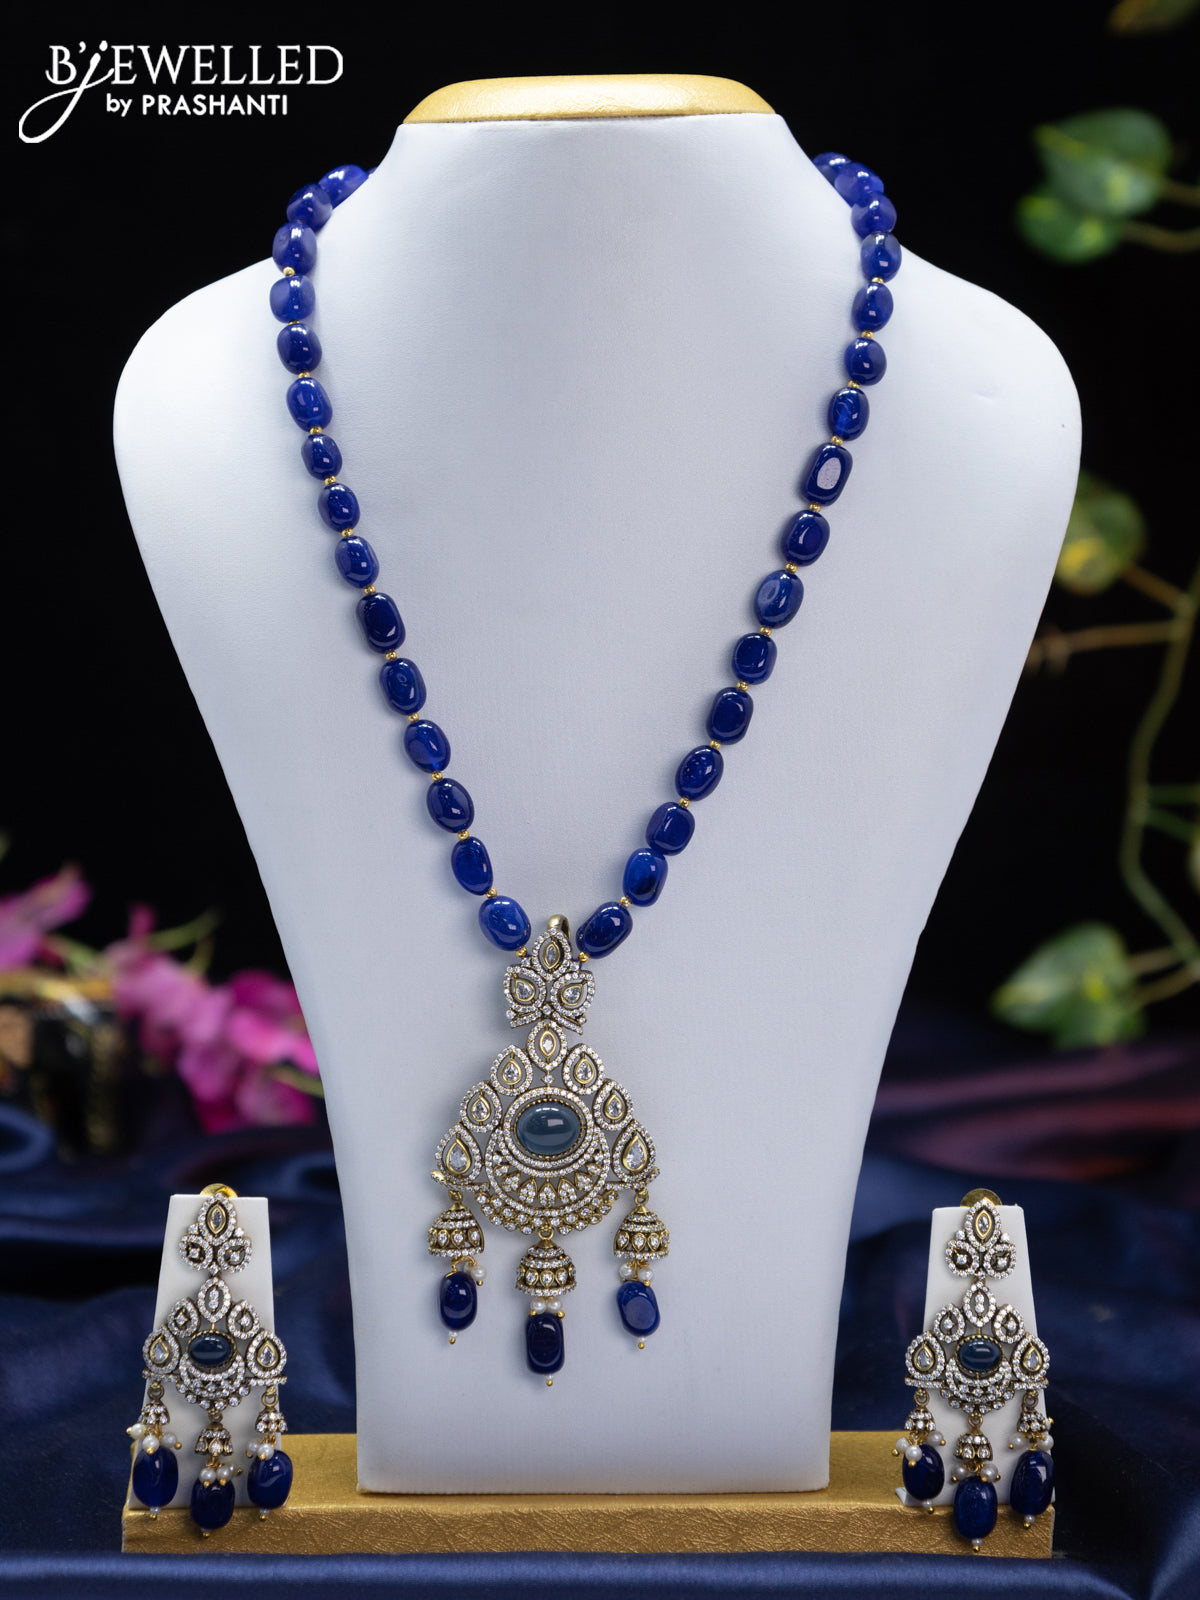 Beaded blue necklace with sapphire & cz stones and beads hangings in victorian finish